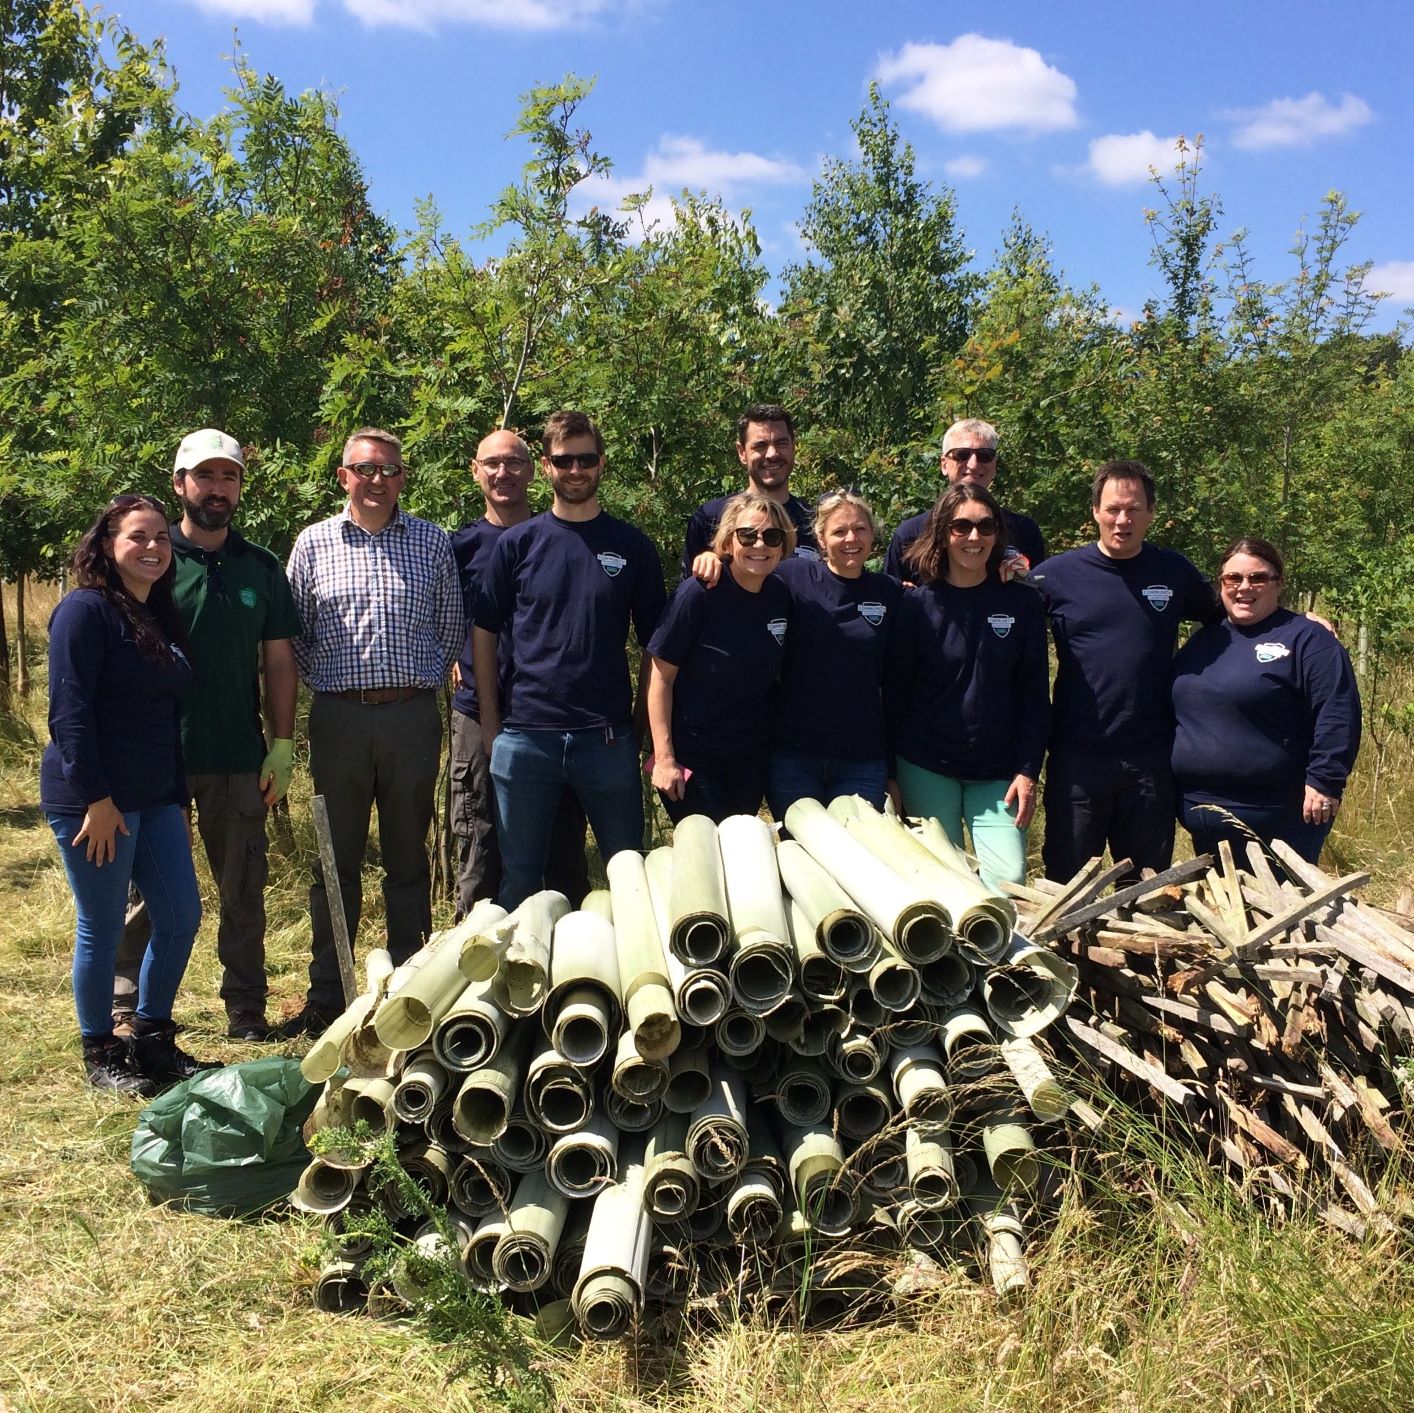 Corporate group stood behind pile of tree tubes and stakes they have removed from the Forest